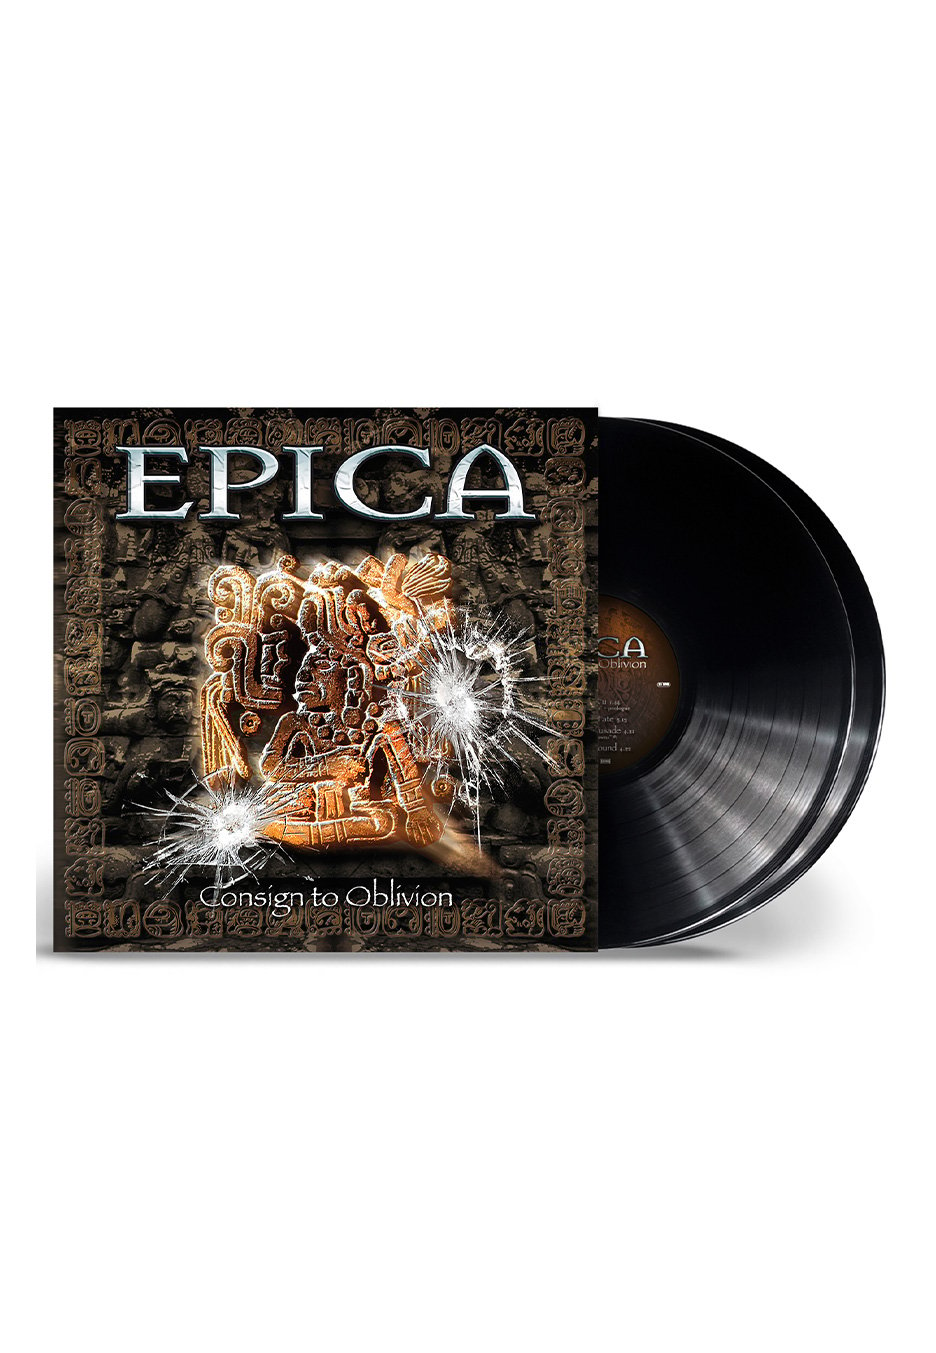 Epica - Consign To Oblivion (Expanded Edition) - 2 Vinyl